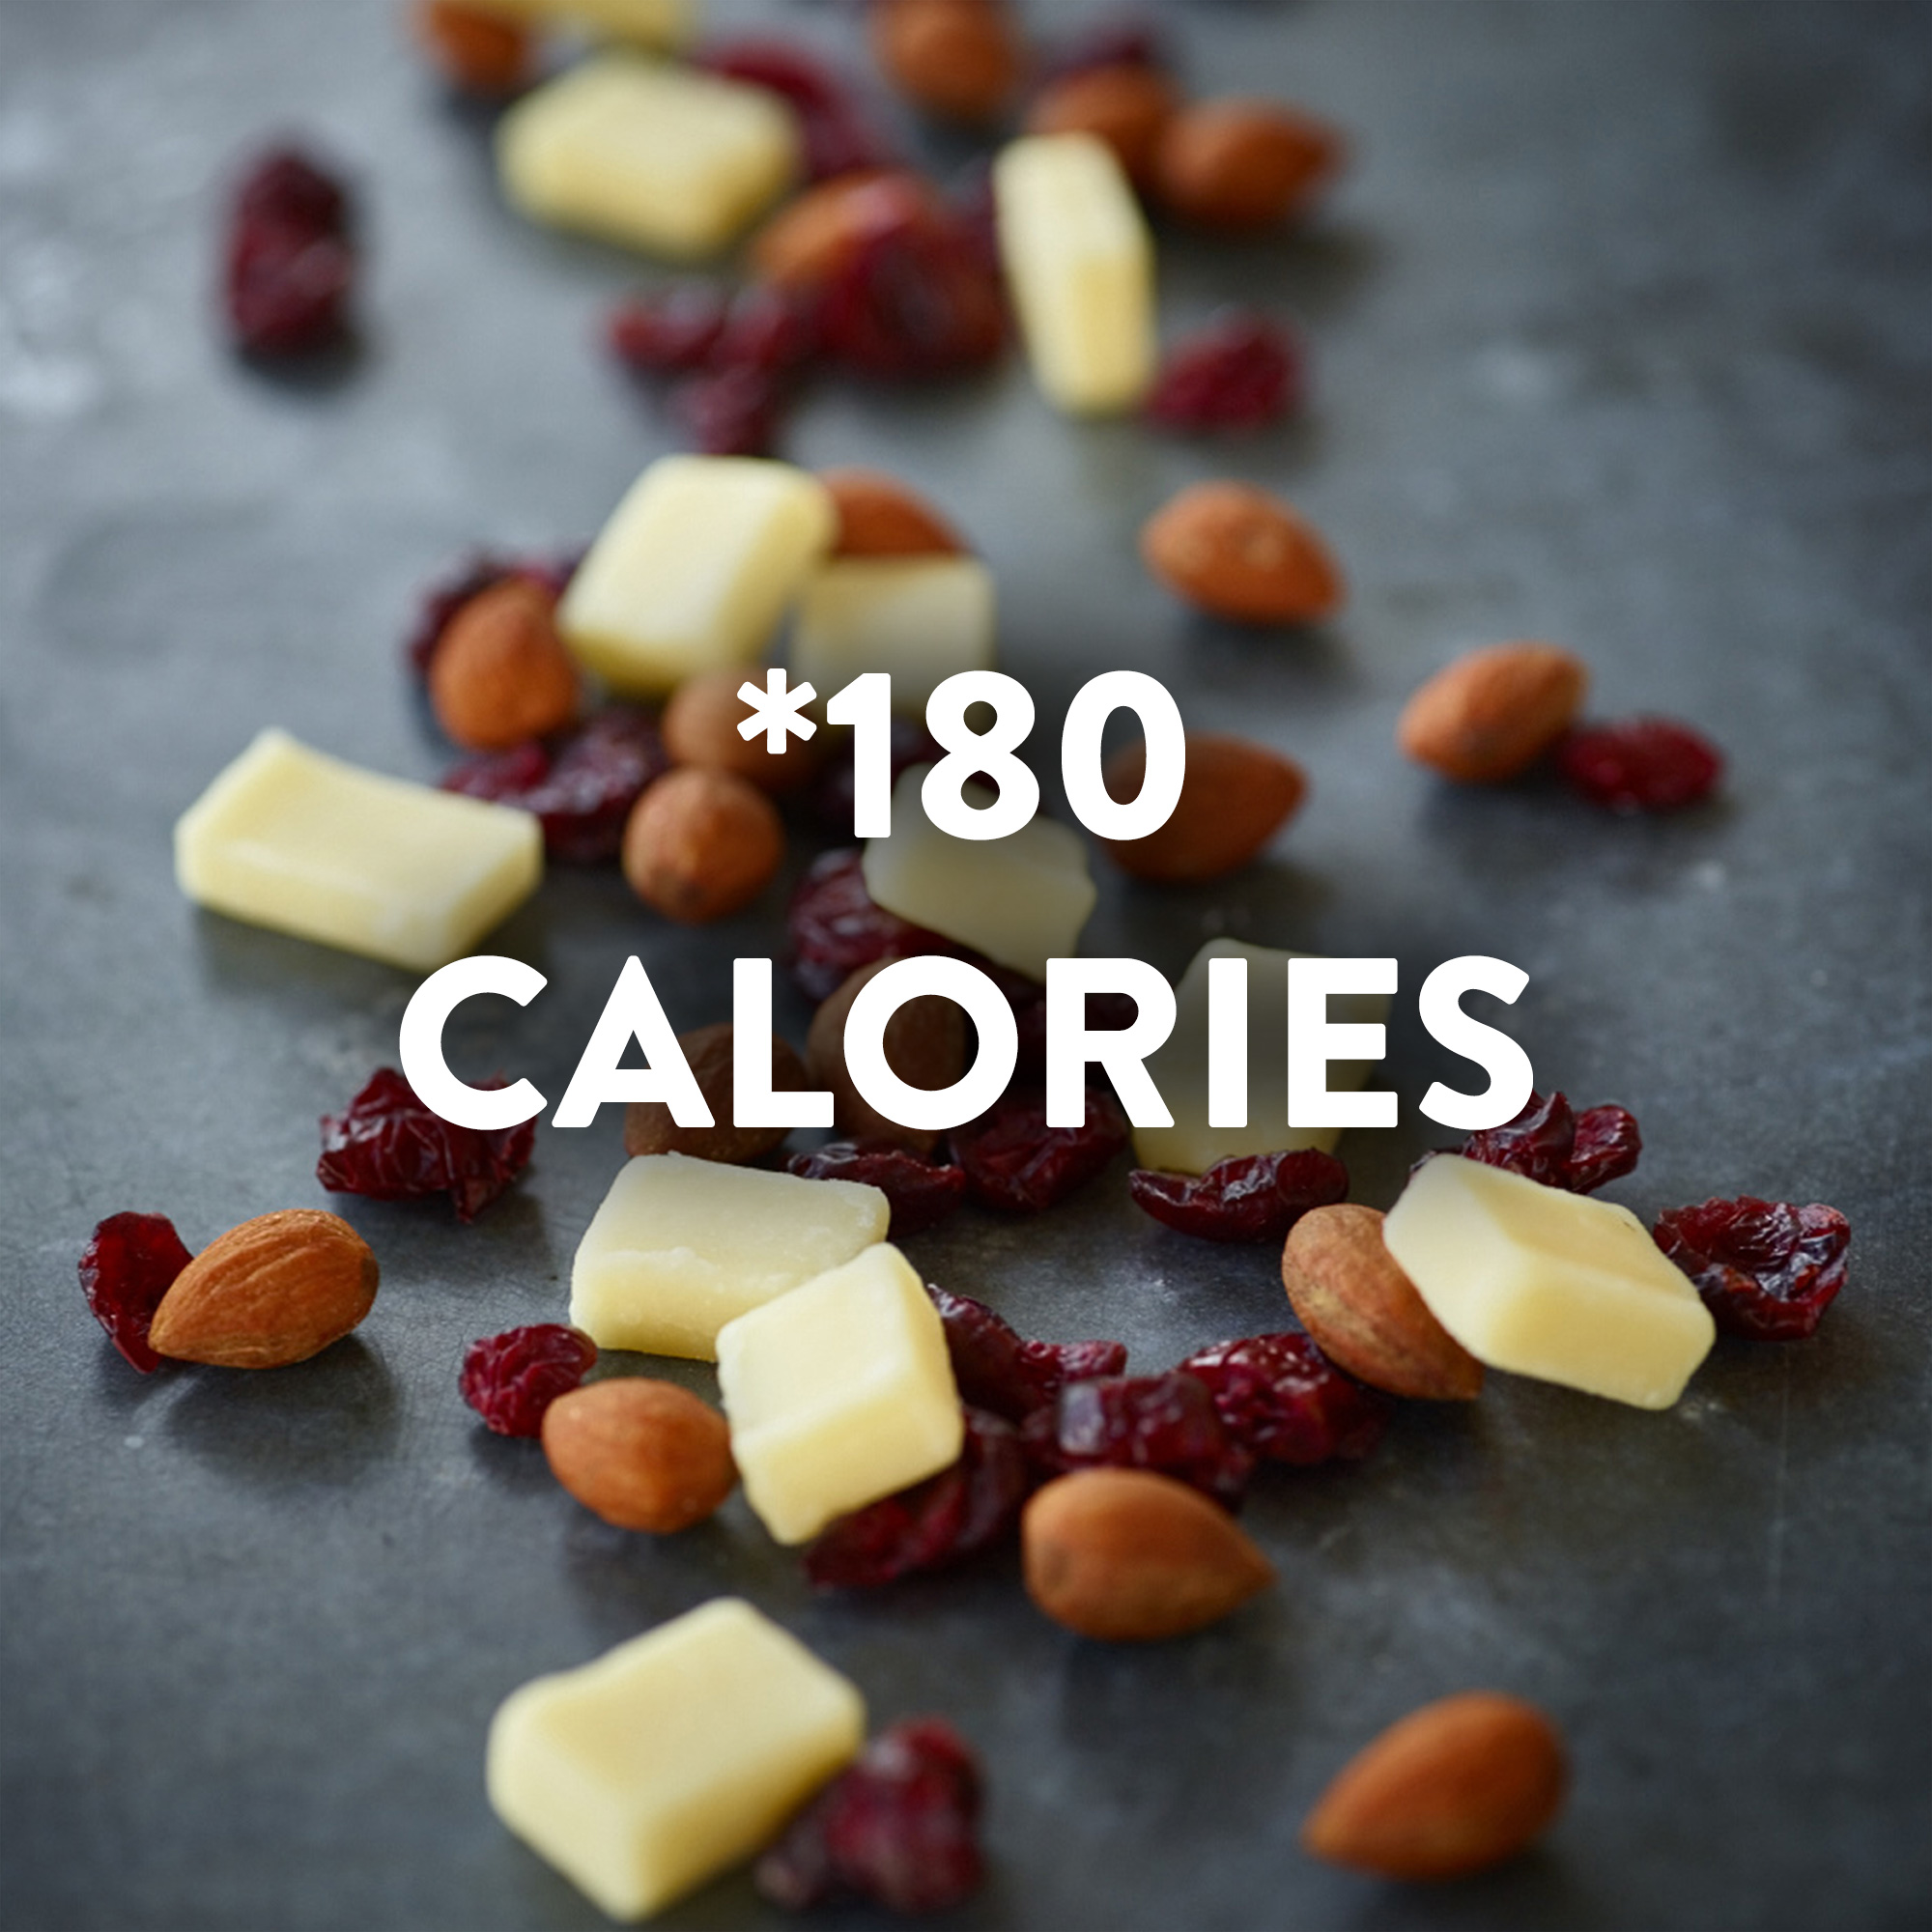 Sargento® Balanced Breaks®, Natural White Cheddar Cheese, Sea-Salted Roasted Almonds and Dried Cranberries